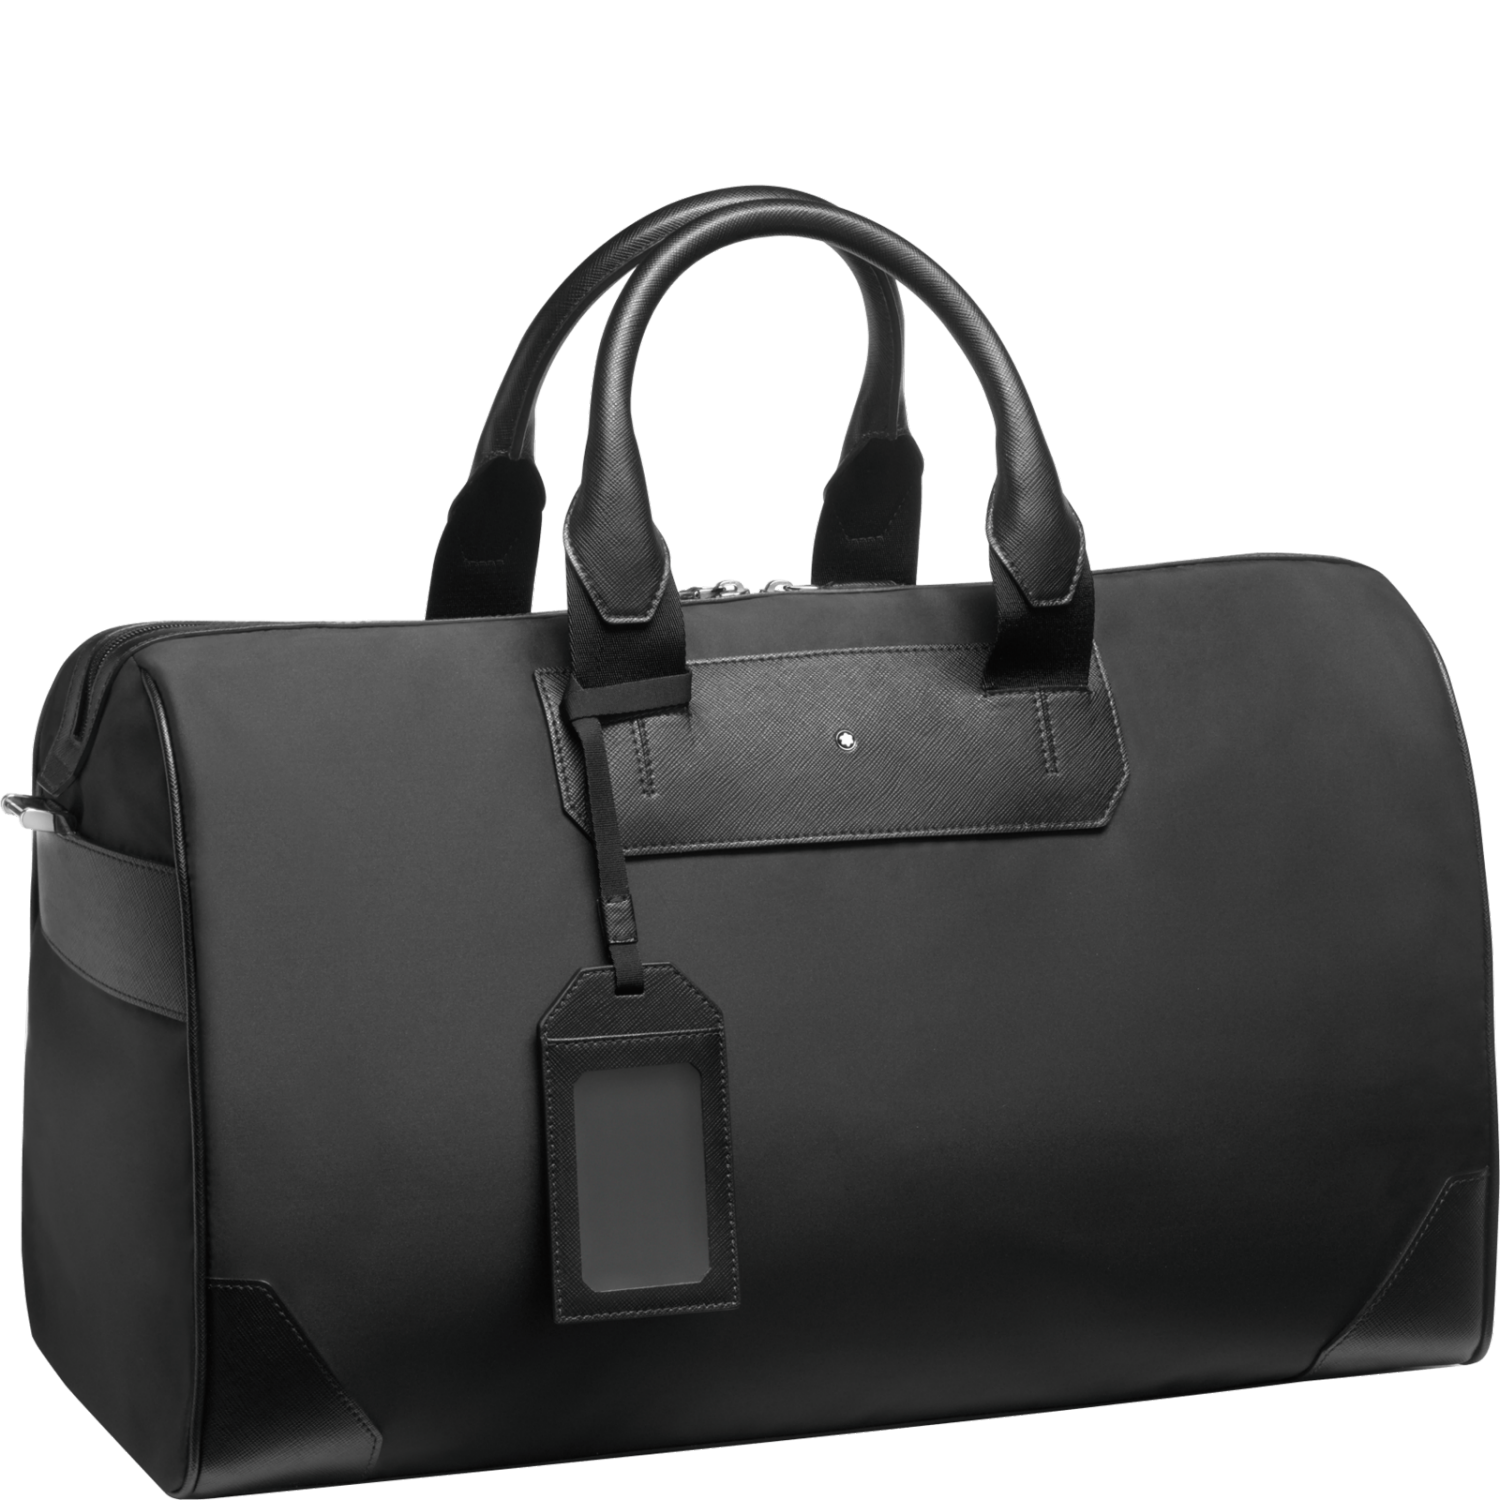 Montblanc Sartorial Jet Large Duffle Bag - Flawless Crowns